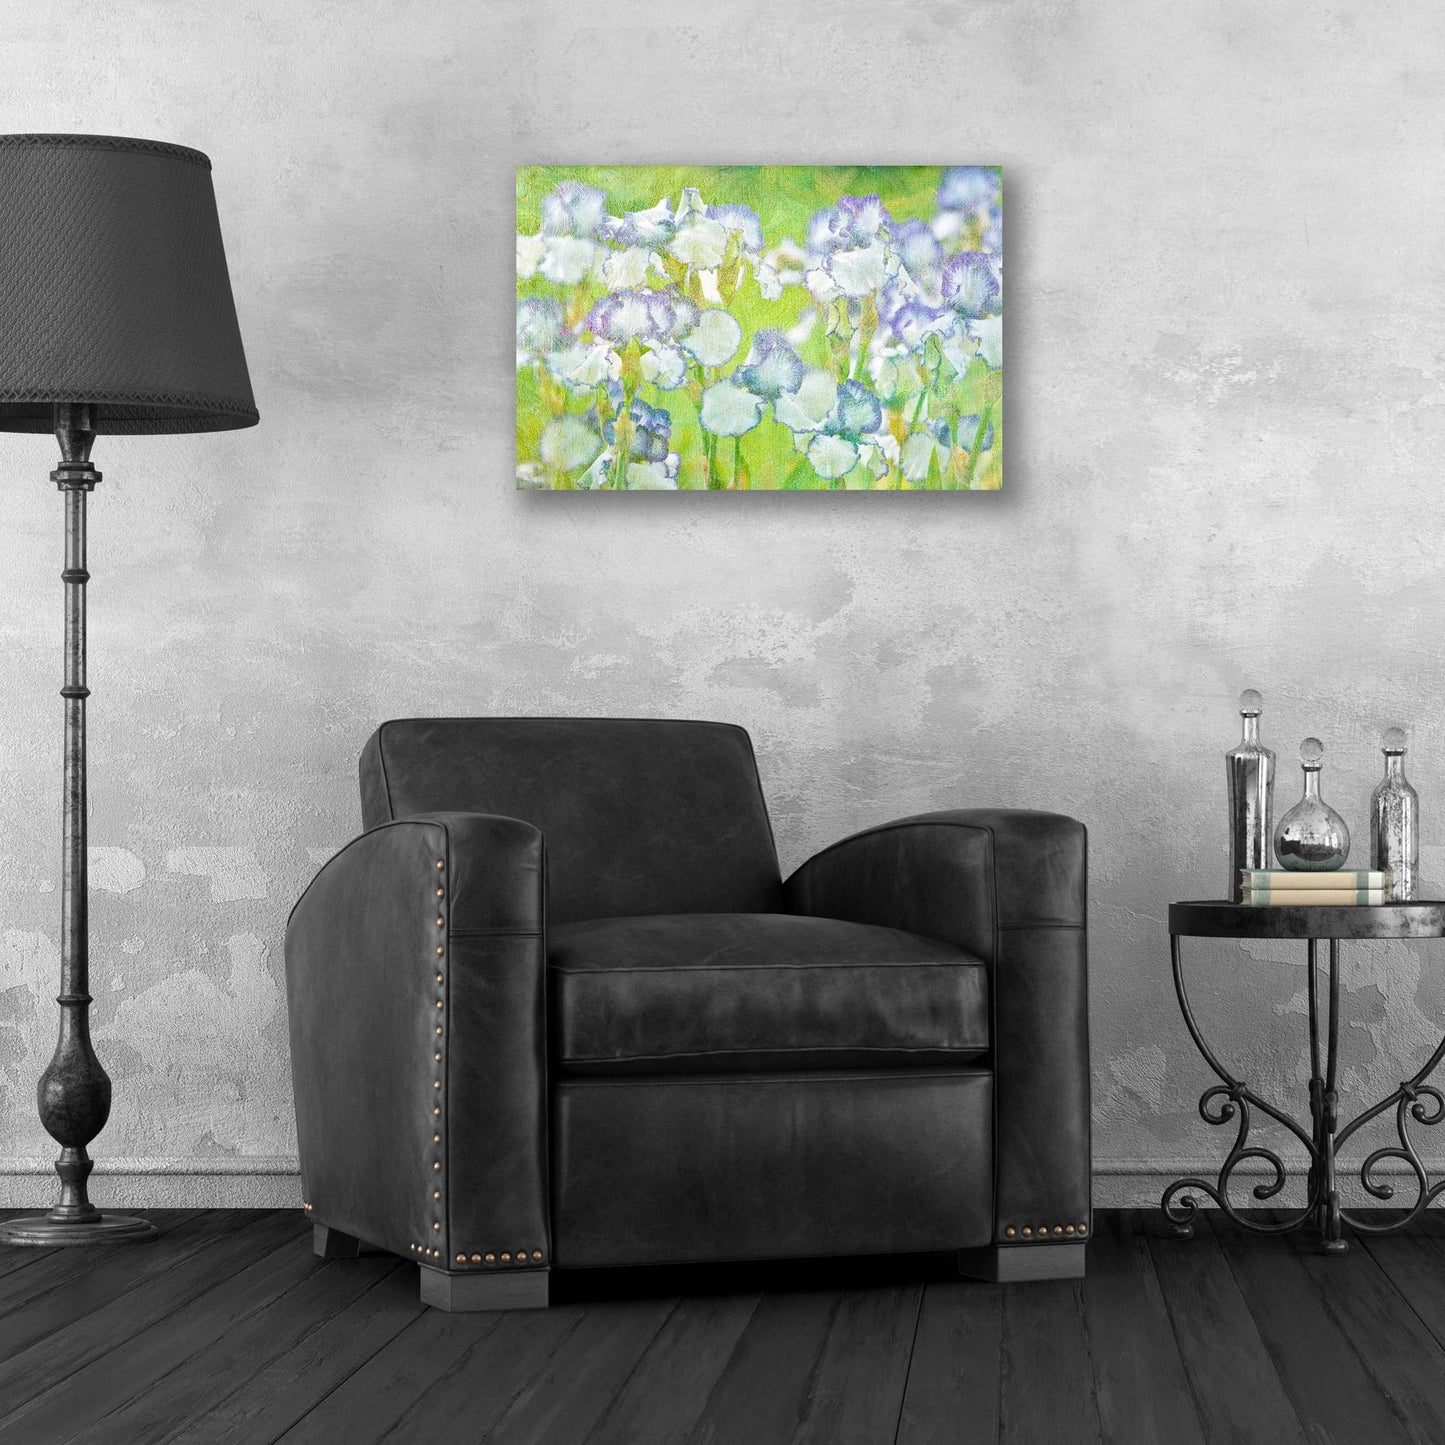 Epic Art 'Lime Floral' by Dennis Frates, Acrylic Glass Wall Art,24x16